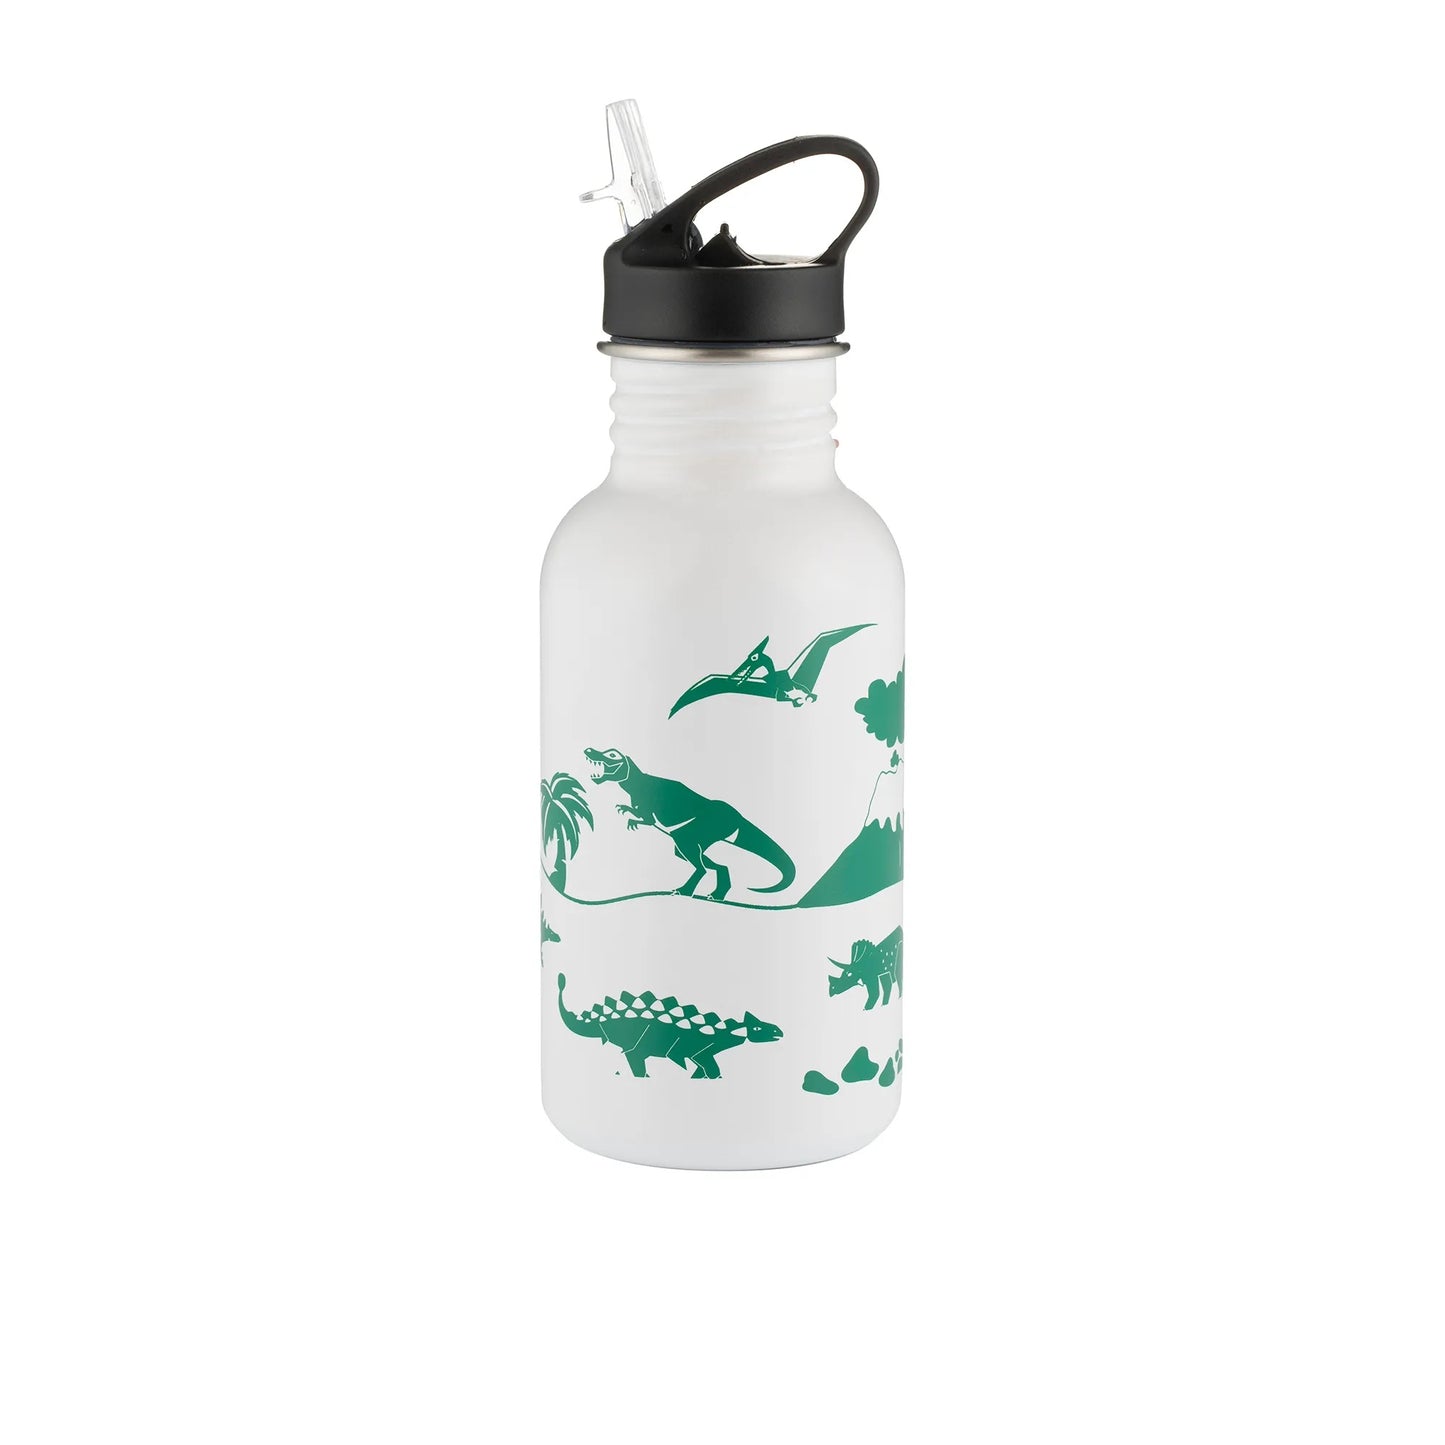 Pure Kids Colour Change Stainless Steel Water Bottle 550ml